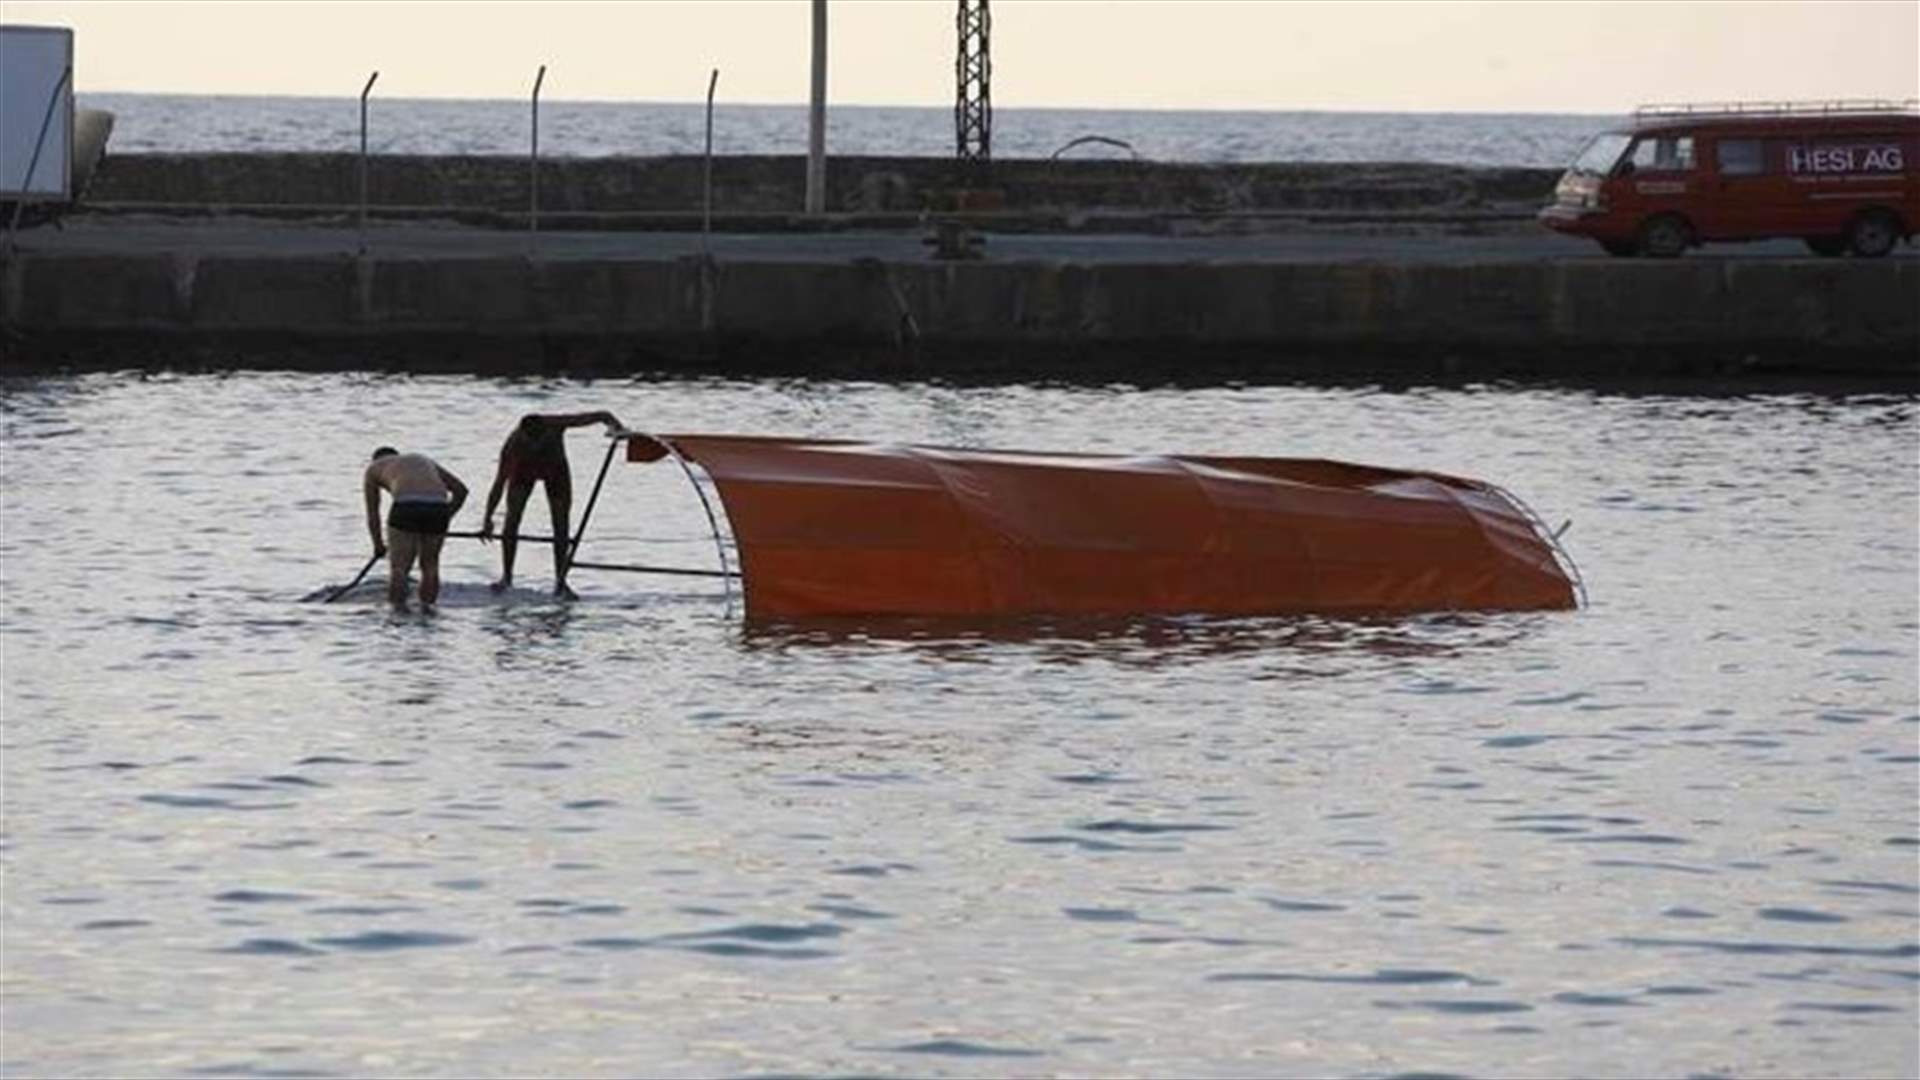 Judge charges two with negligence over Sidon boat incident